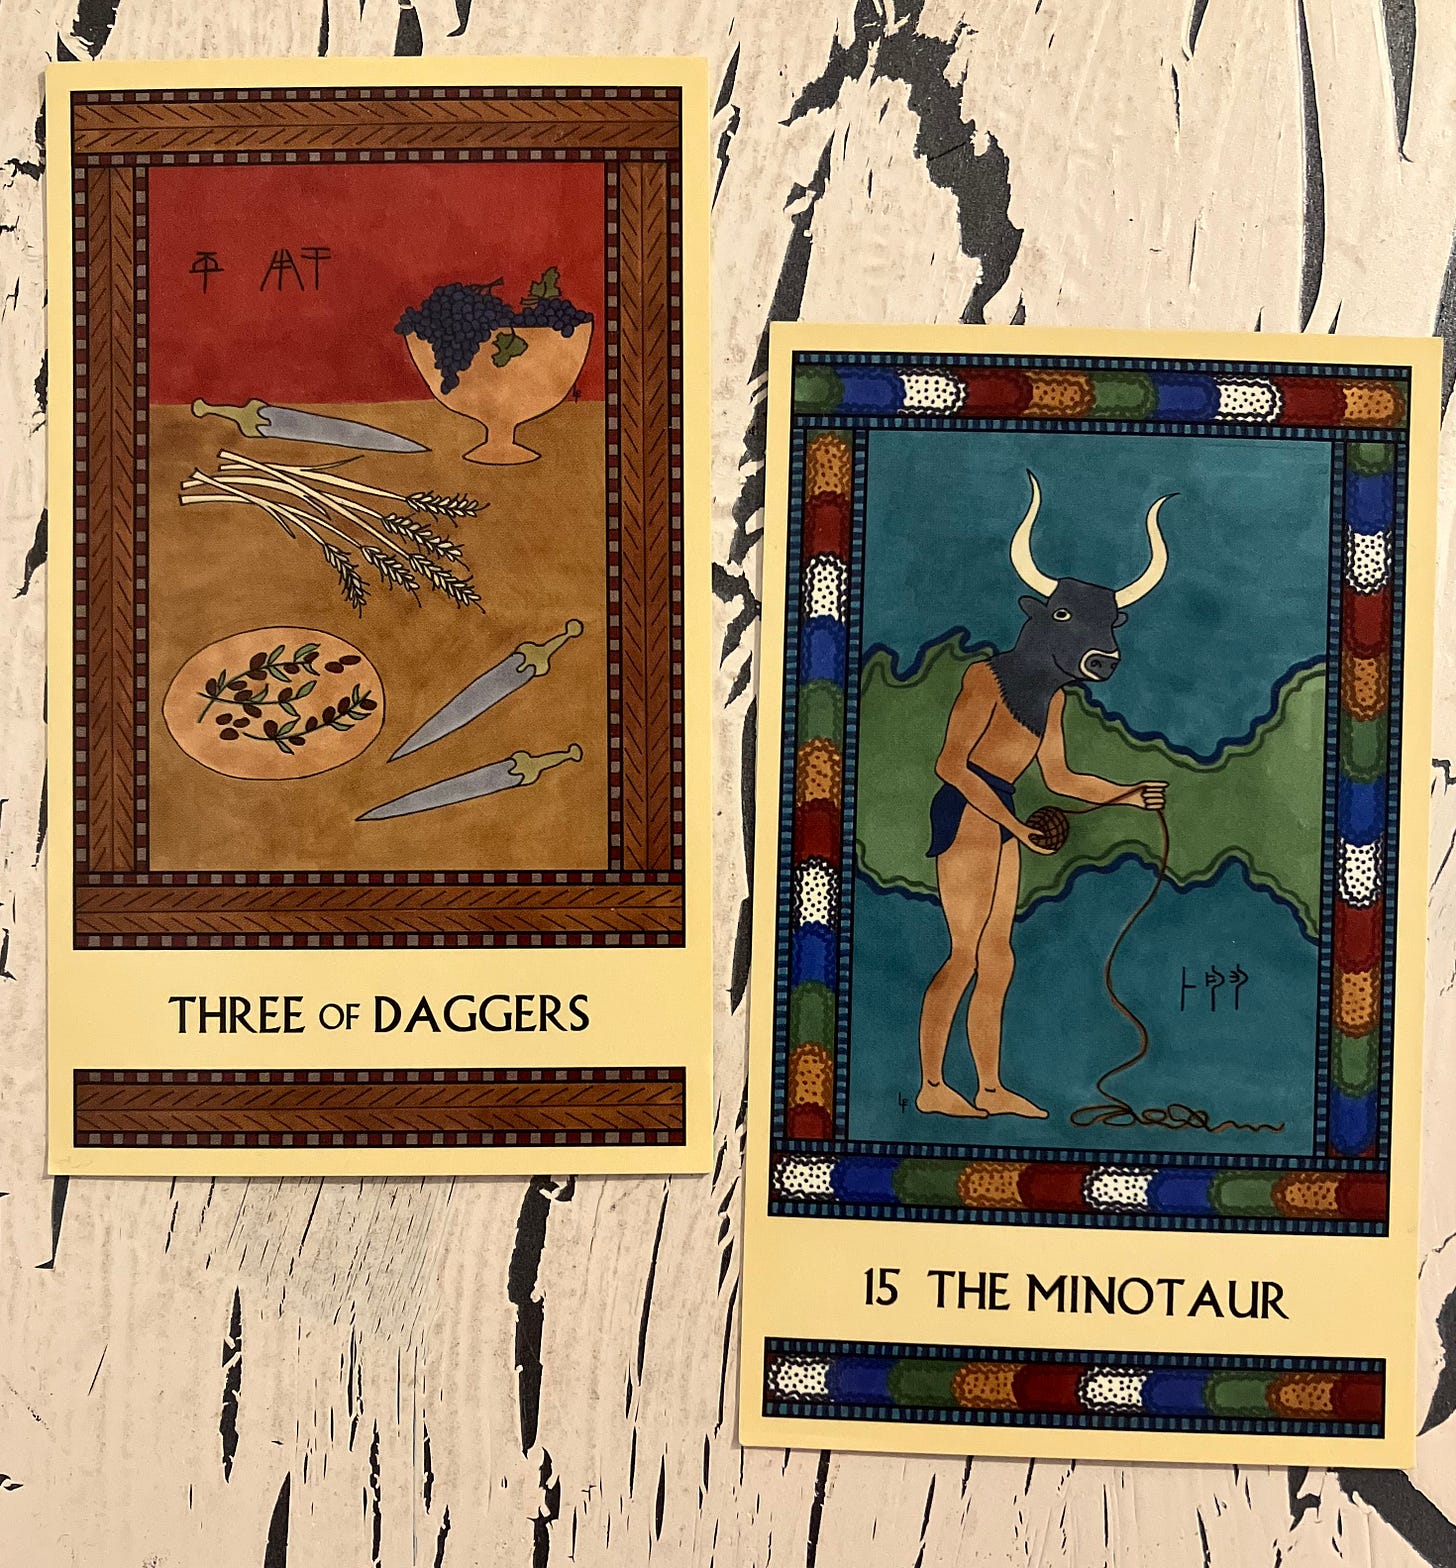 Two Minoan Tarot cards side by side on a crackled white background. The Three of Daggers is in shades of tan and deep red. It shows a tabletop with a bowl of grapes, a platter of olives, several stalks of wheat, and three daggers. The Minotaur has a multicolored border. It shows a Minoan man in a loincloth, wearing a bull's head mask and holding a ball of string that he's unwinding.